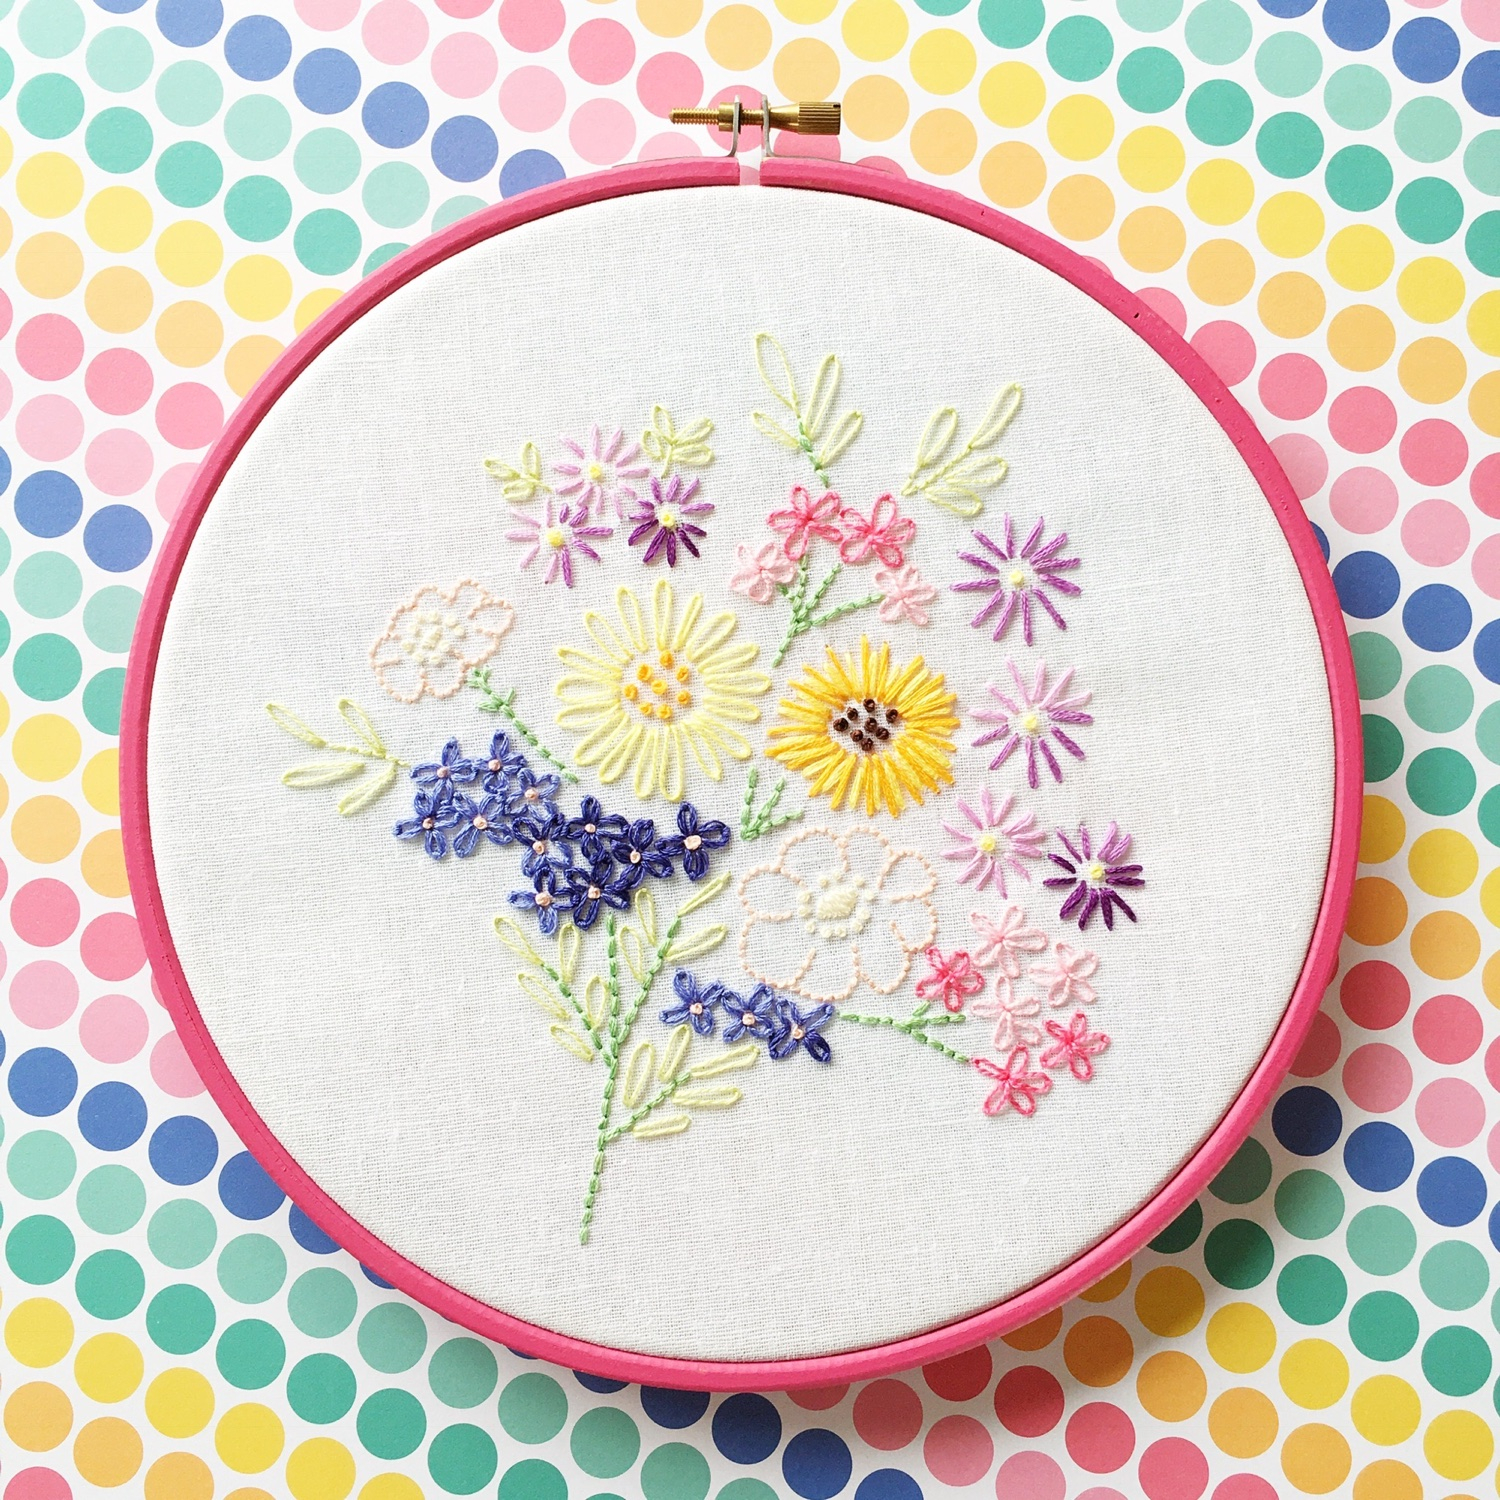 Vintage Floral Embroidery Patterns New Embroidery Patterns From Hellohoorayshop Hello Hooray